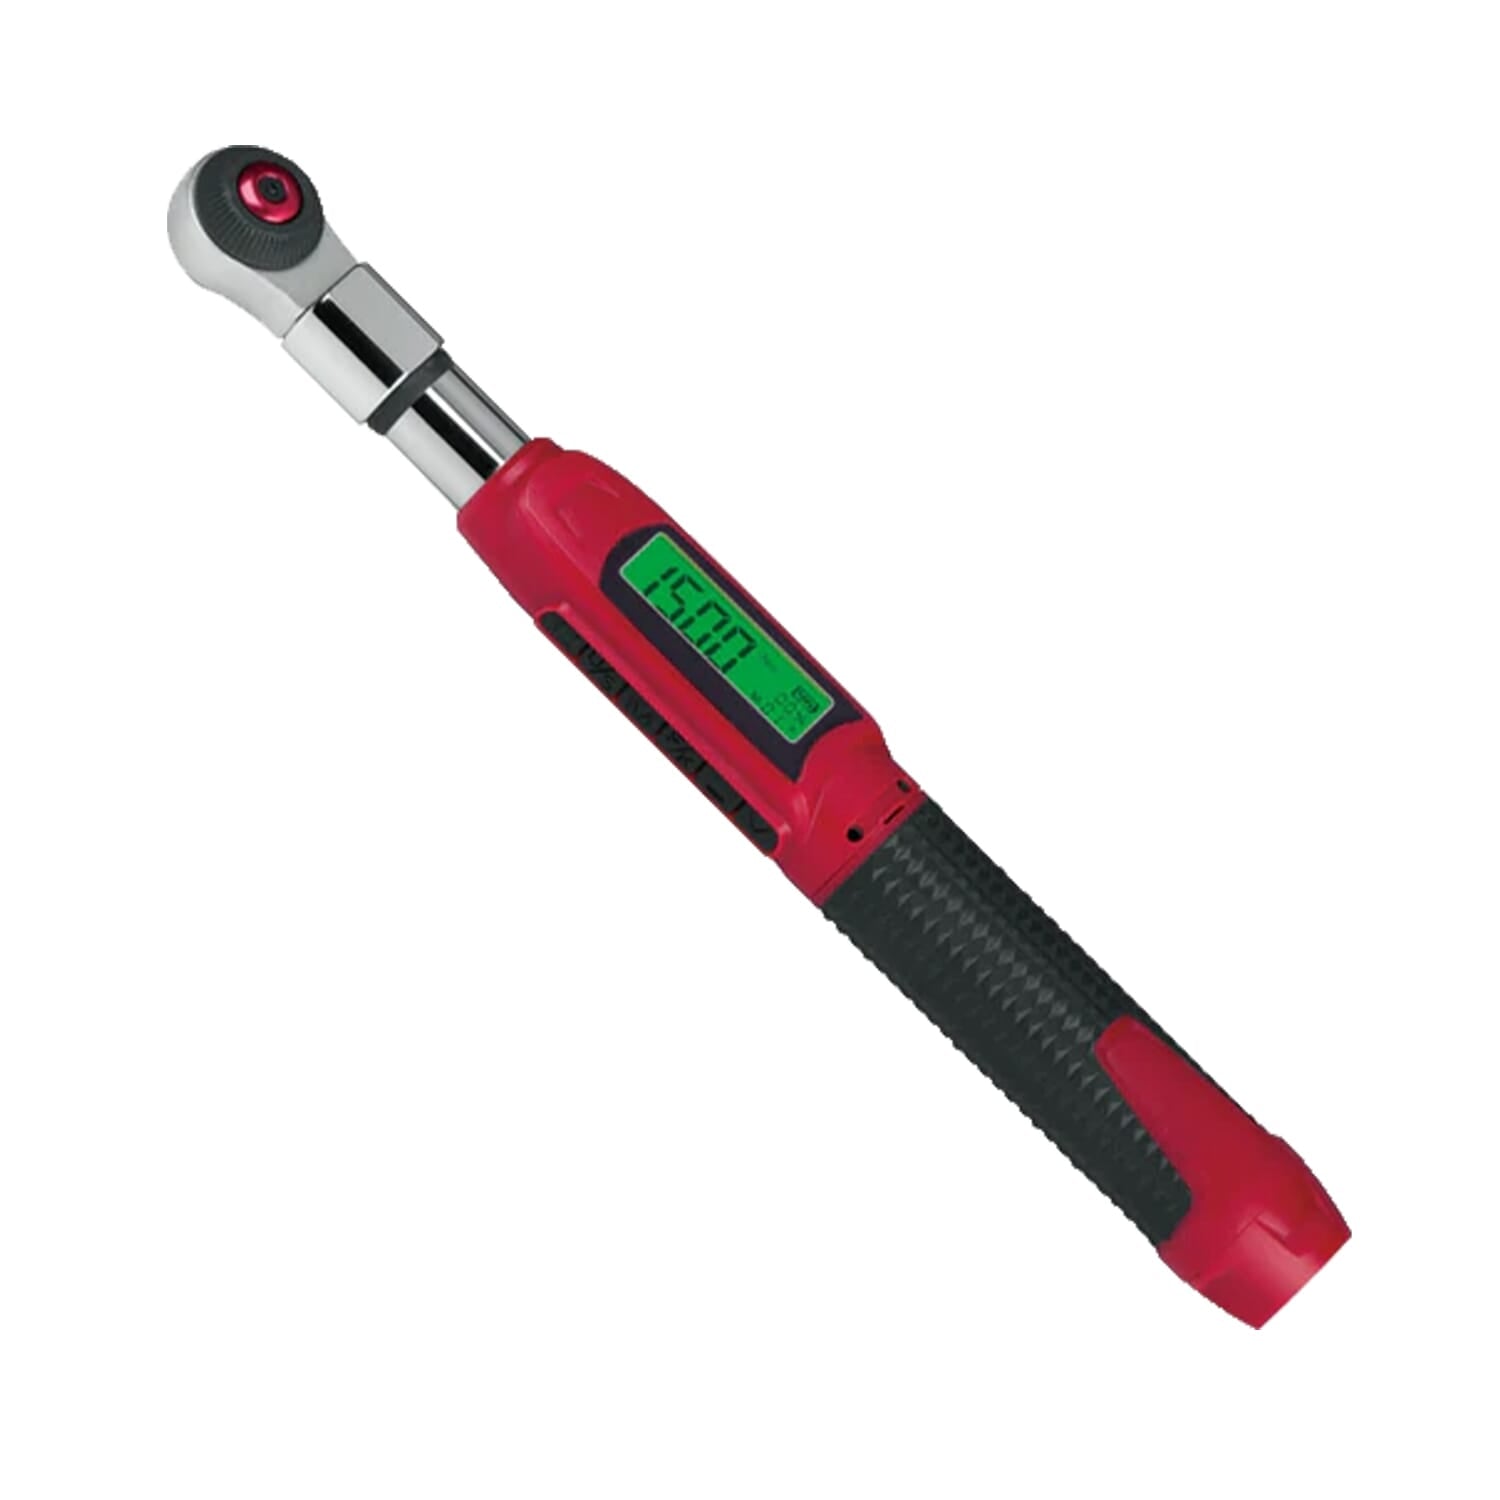 ARM331-2I 1/4" Interchangeable Digital Torque Wrench (2.5-25 Nm) with Buzzer, Vibration & Flash Notification